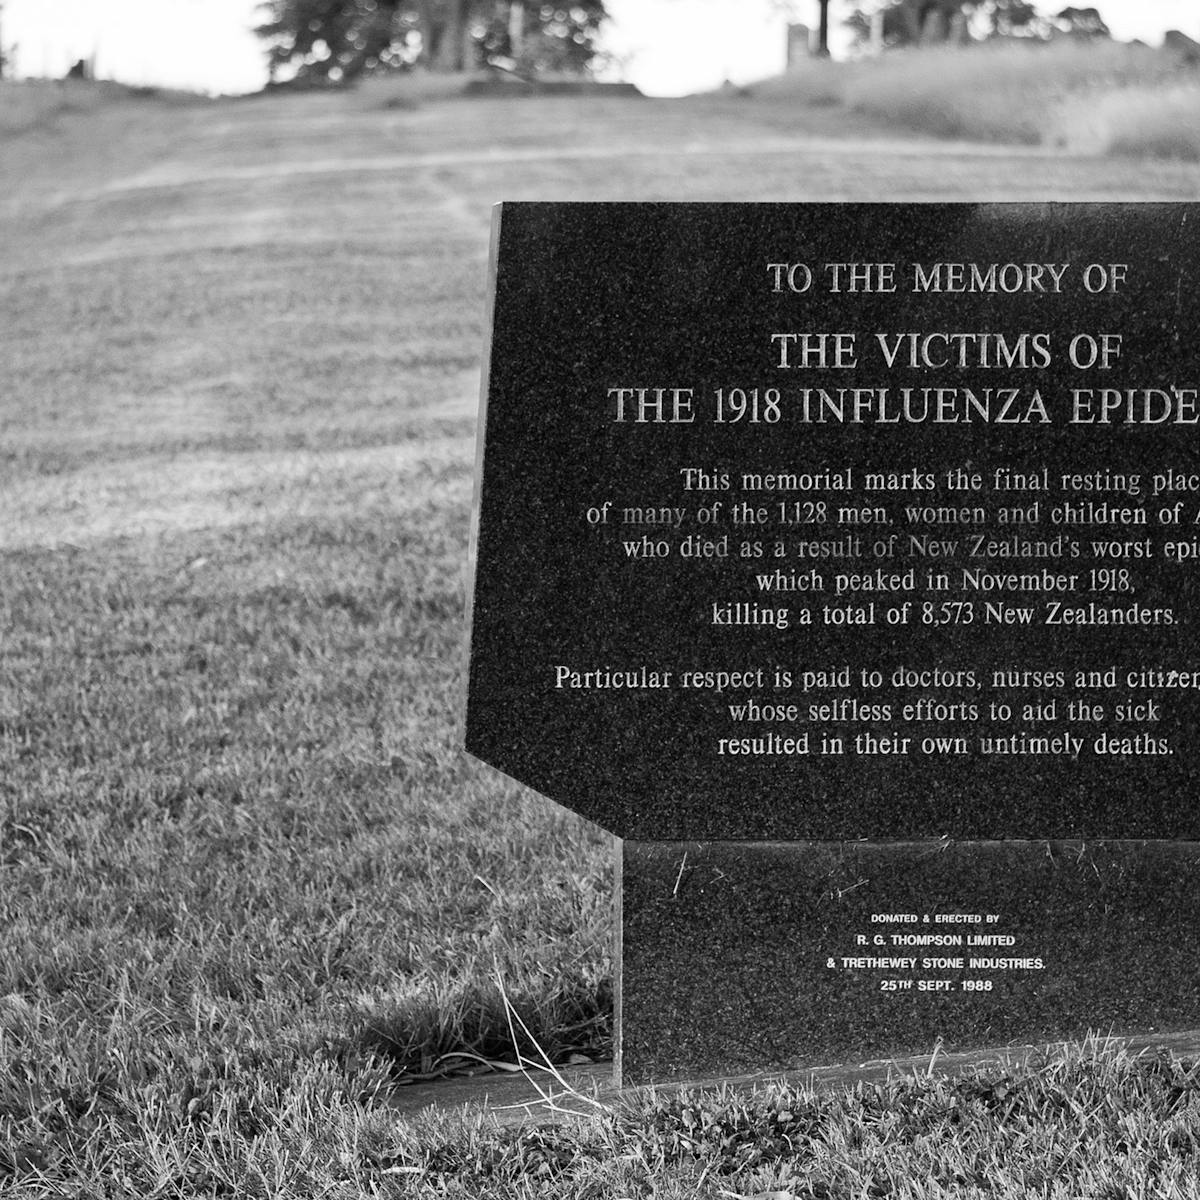 Plaque reads: This memorial marks the final resting place of many of the 1,128 men, women and children of Auckland who died as a result of New Zealand's worst epidemic which peaked in November 1918, killing a total of 8,573 New Zealanders. At the bottom it says it was donated and erected in 1988.